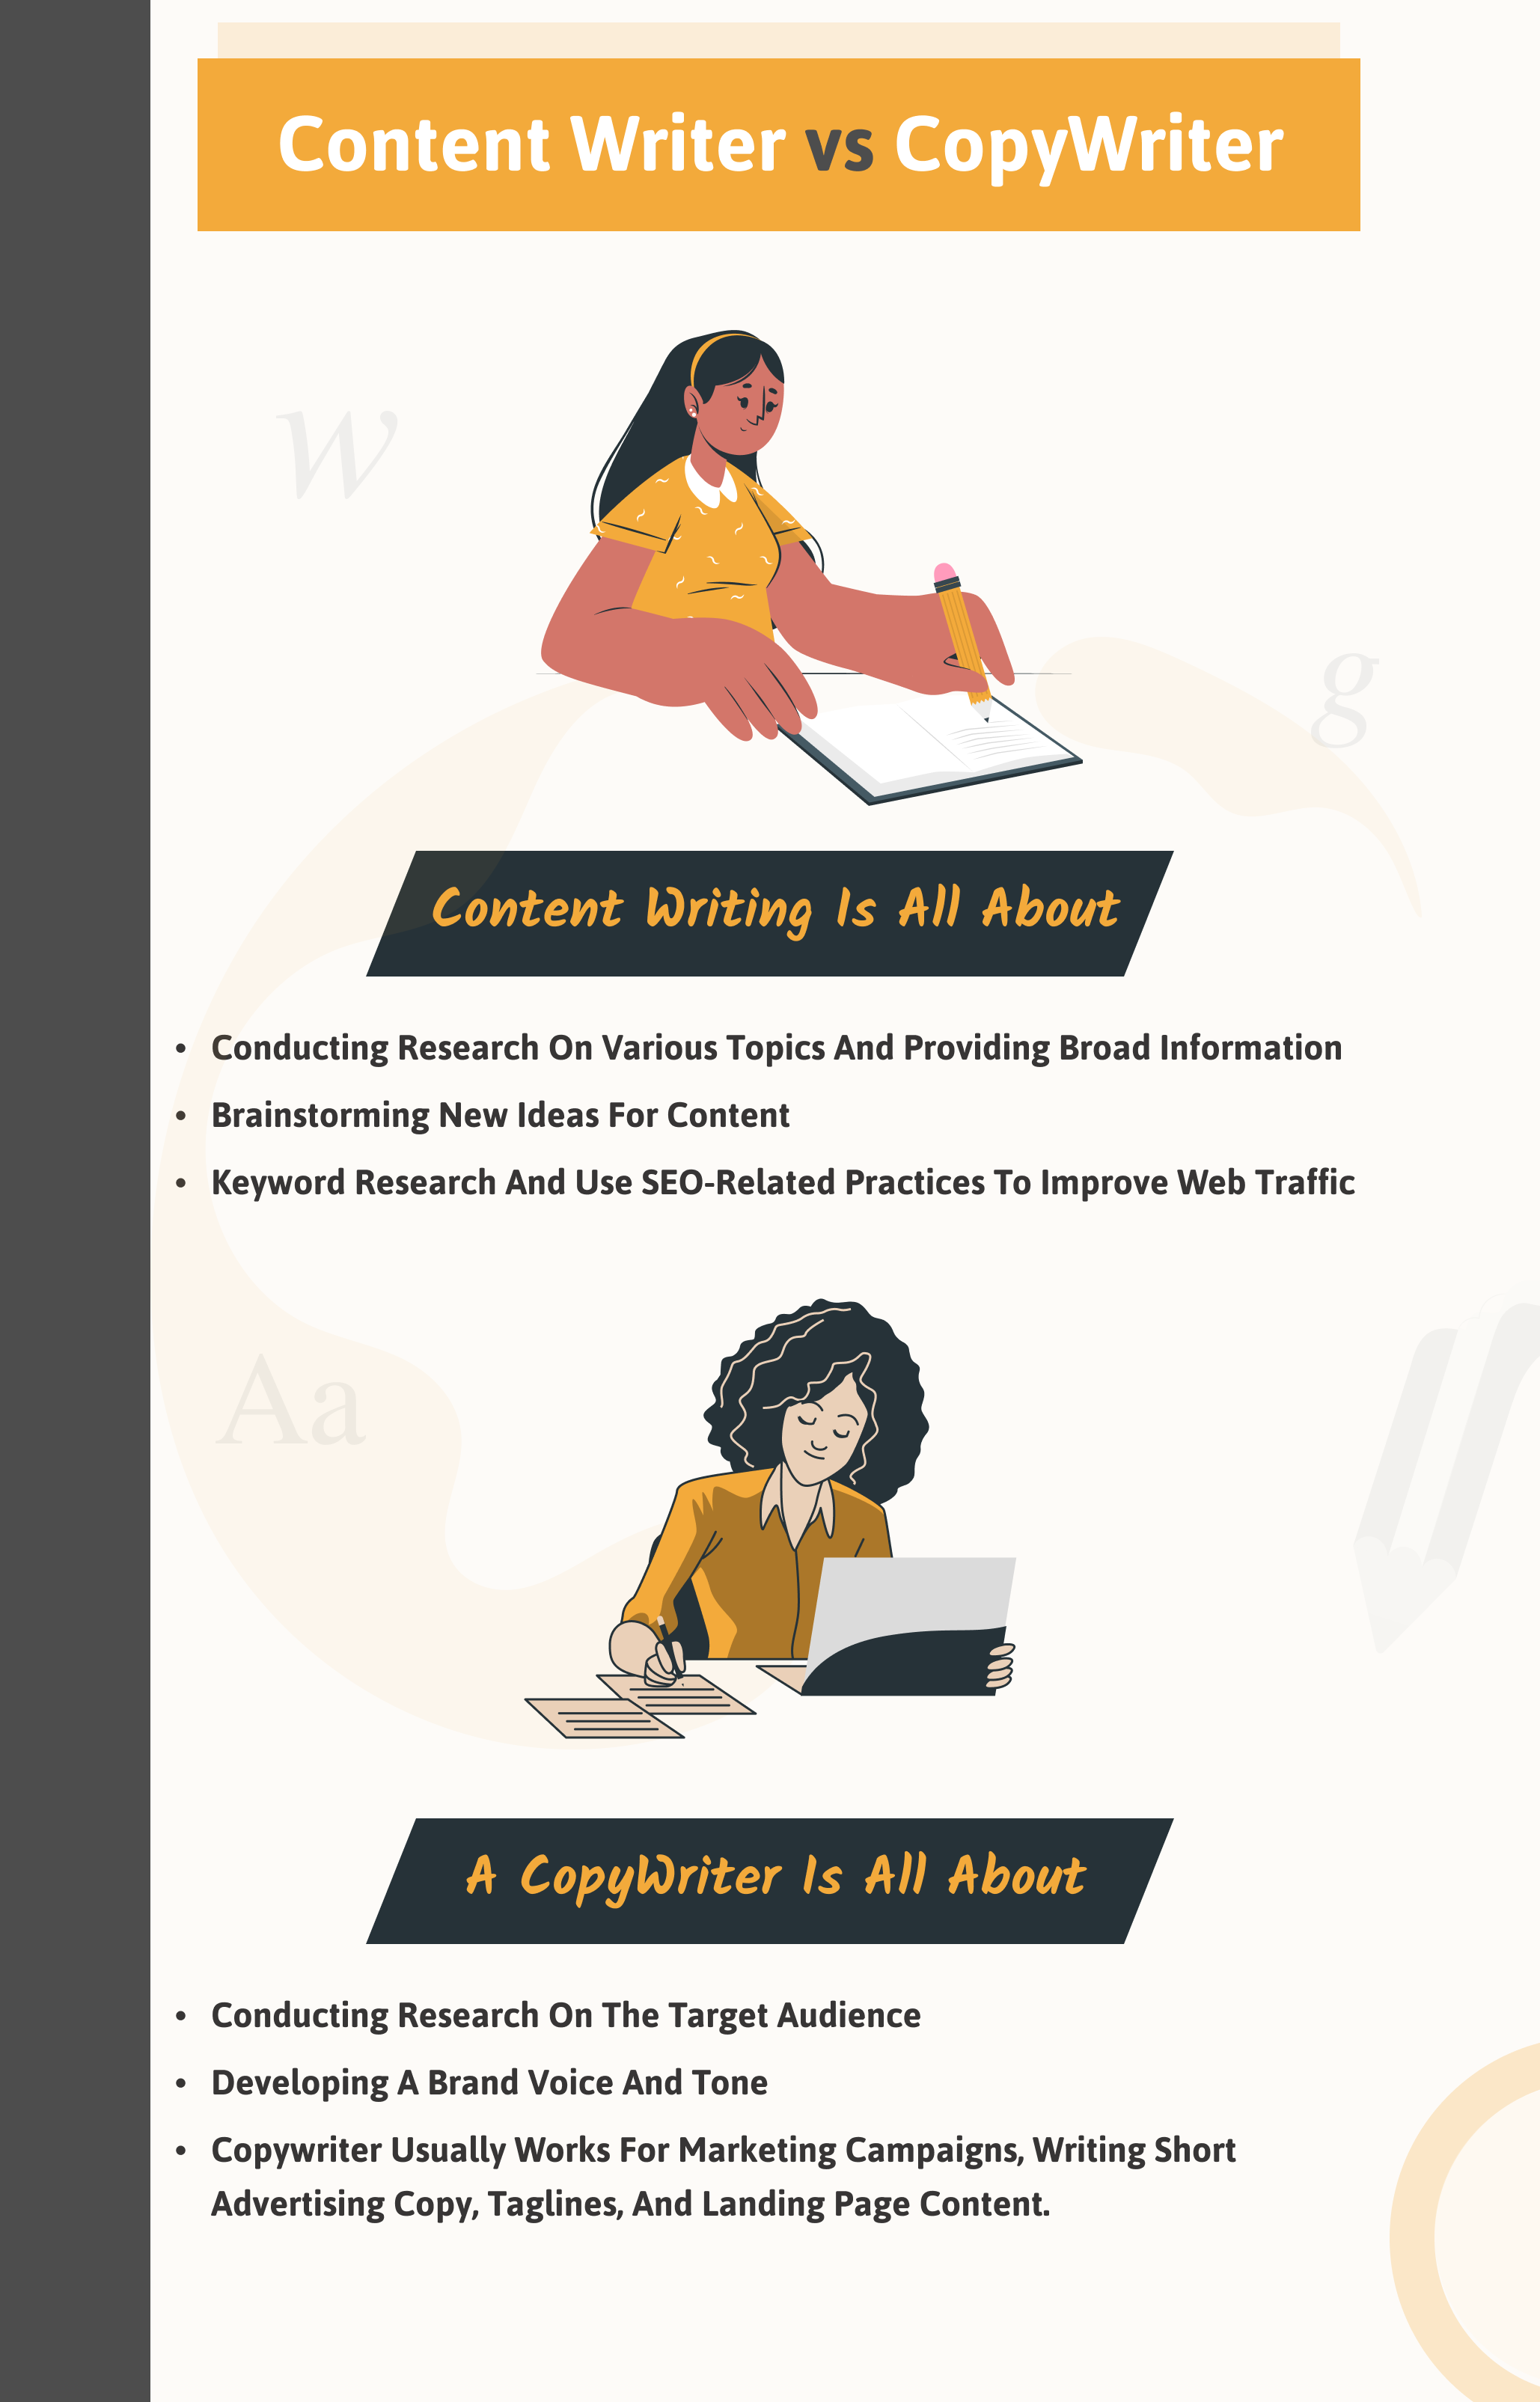 Content writing and copywriting are all about - Infographic